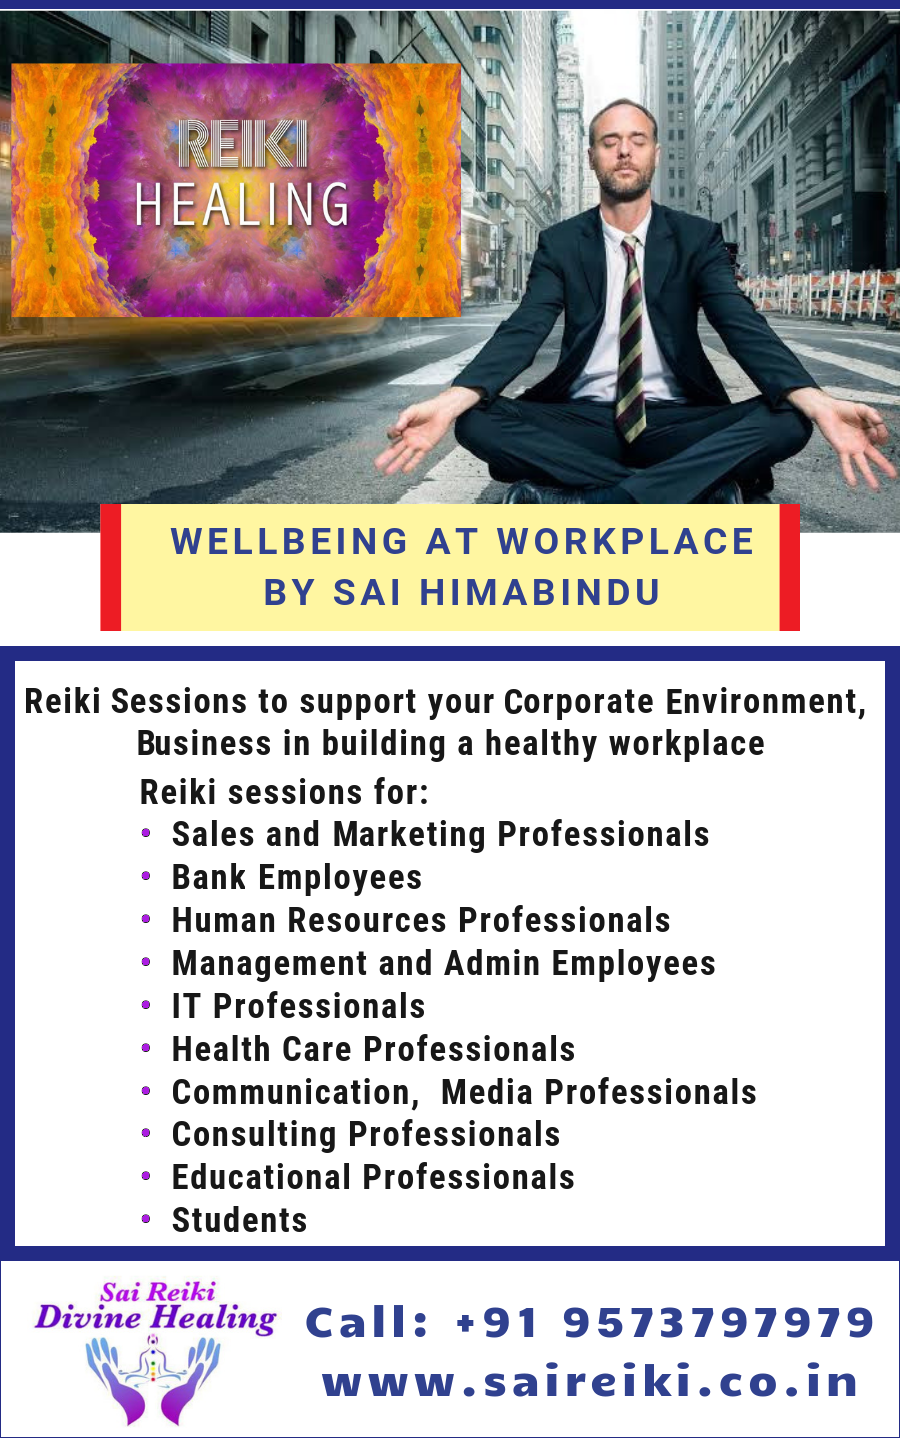 Wellbeing and Stress Management at workplace by Sai Hima Bindu - Hyderabad